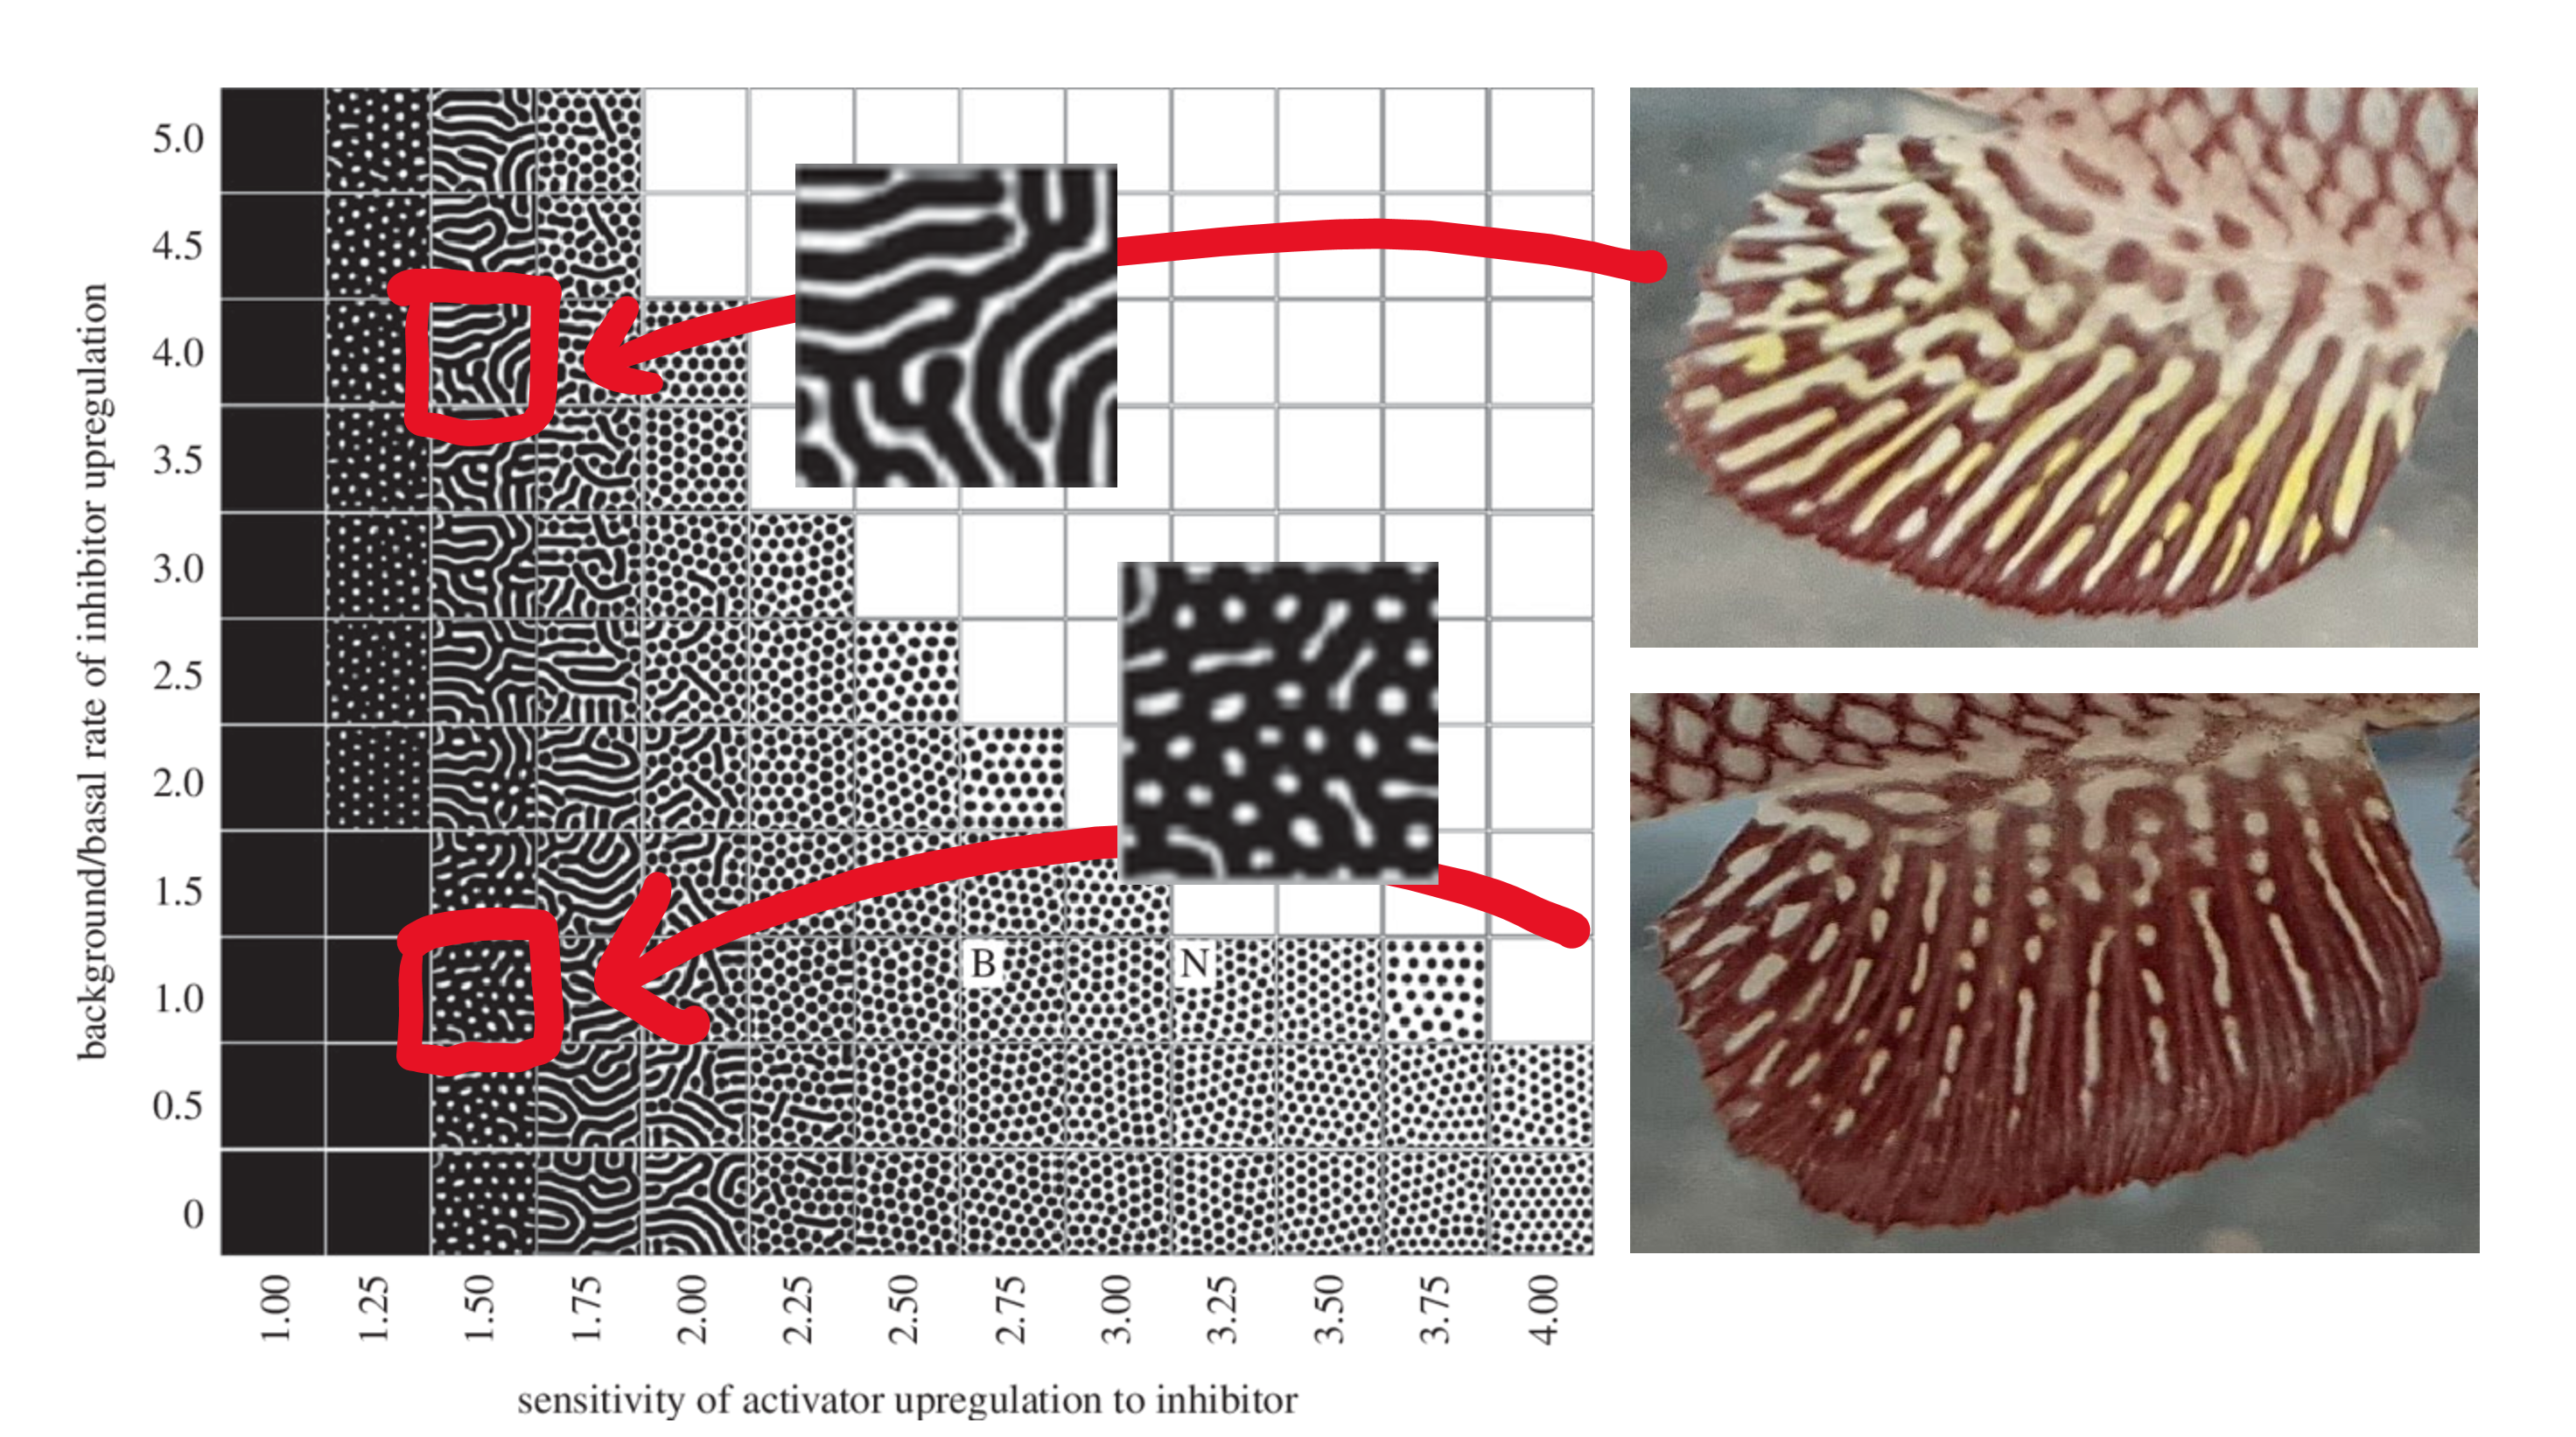 The color patterns on the African killifish fins remarkably resemble the Turing Patterns and its modeling results